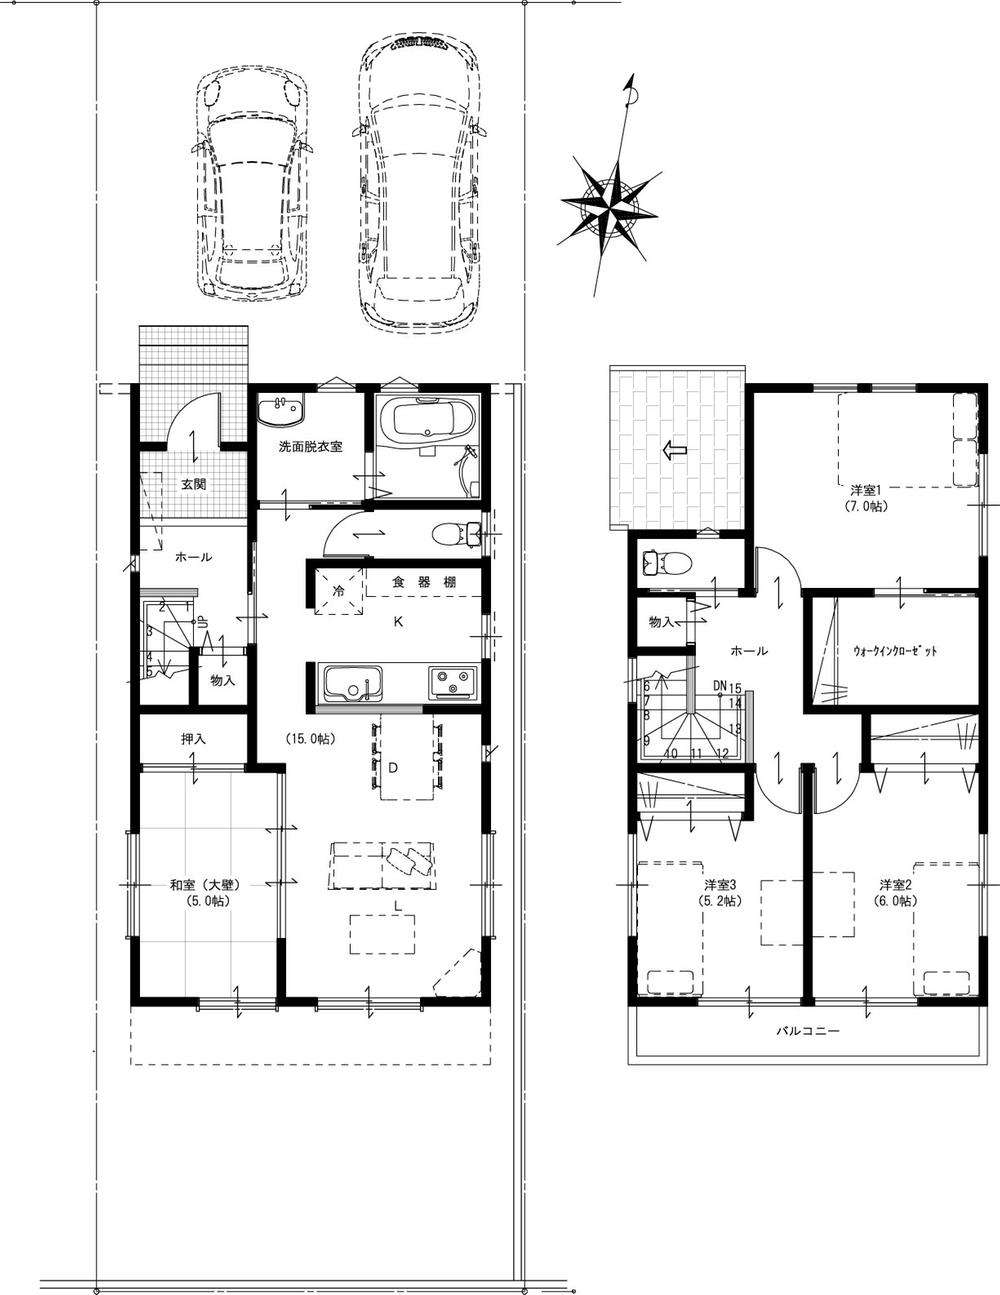 Other building plan example. Building plan example (E compartment) Building price 14.5 million yen (tax included), Building area 105.18 sq m